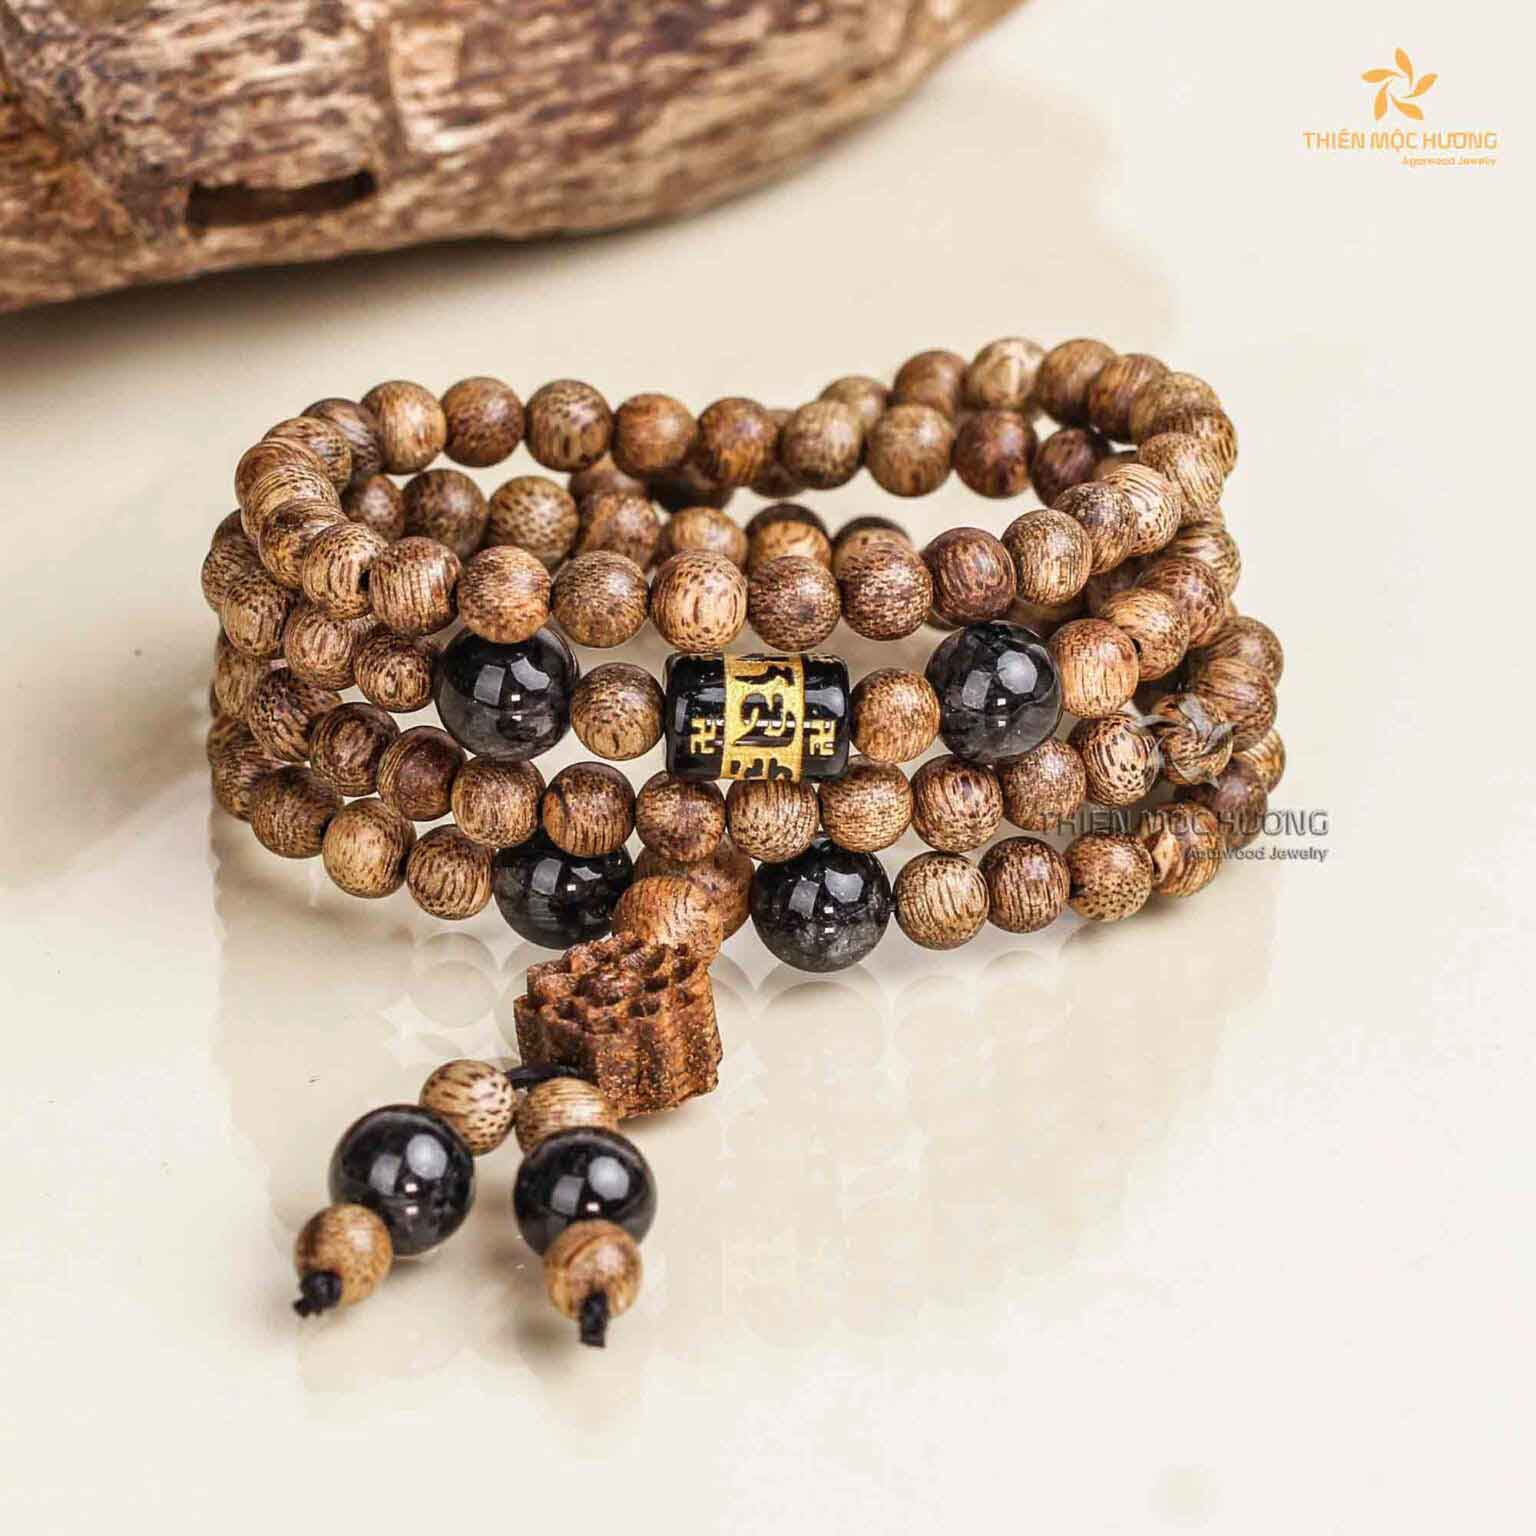 Spiritual Blessing 108 mala beads Bracelet is a jewelry accessory known for its simplicity but creates depth